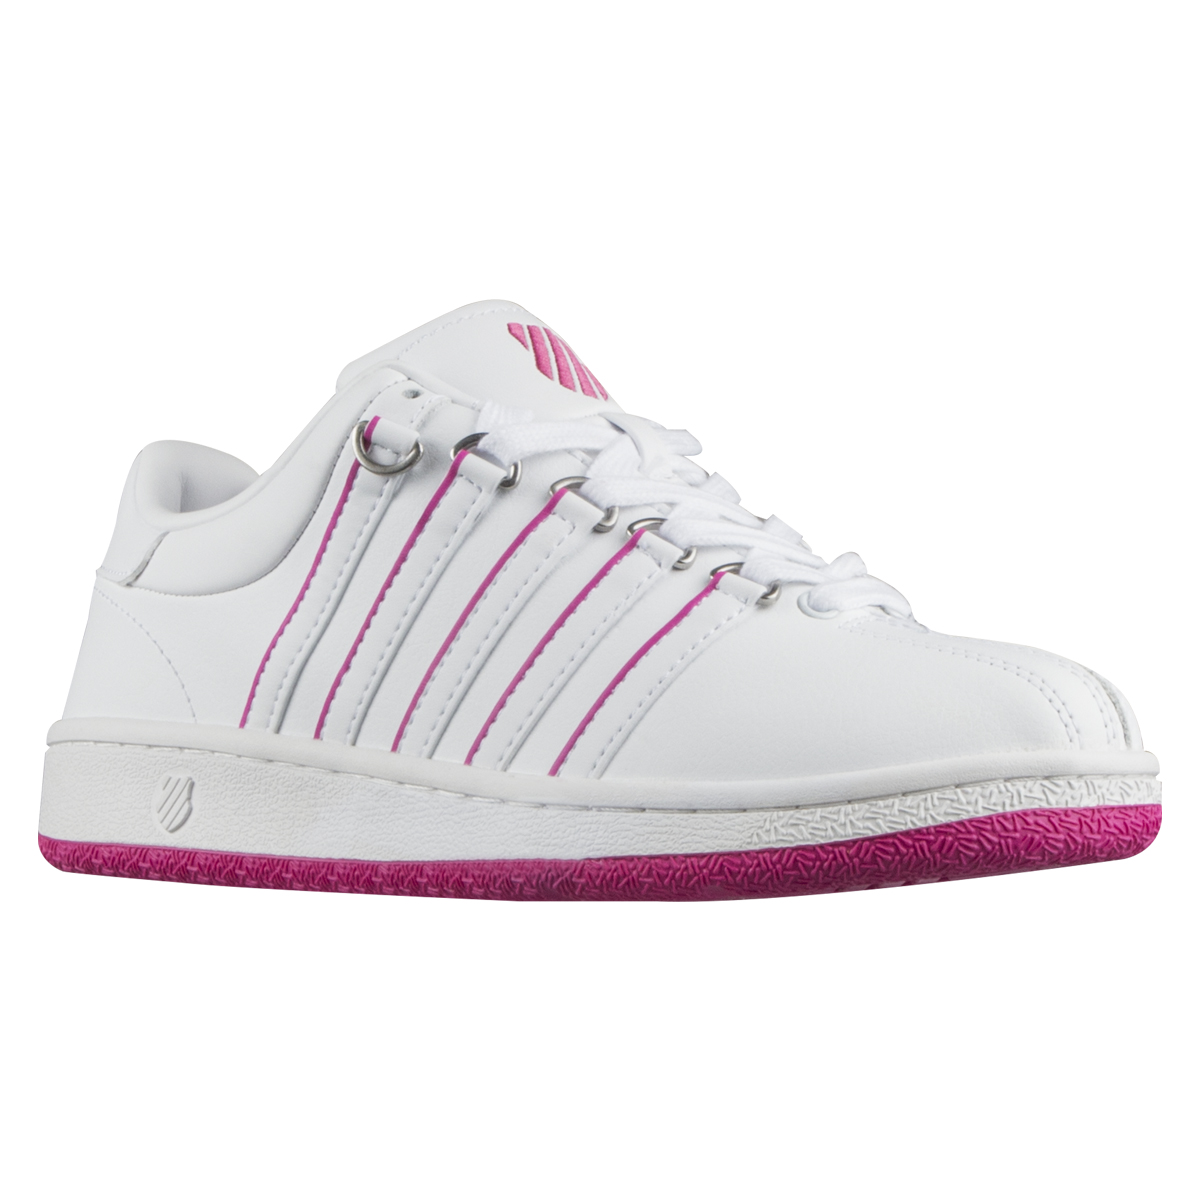 Tenis K-SWISS Classic VN para Mujer color Blanco con Rosa